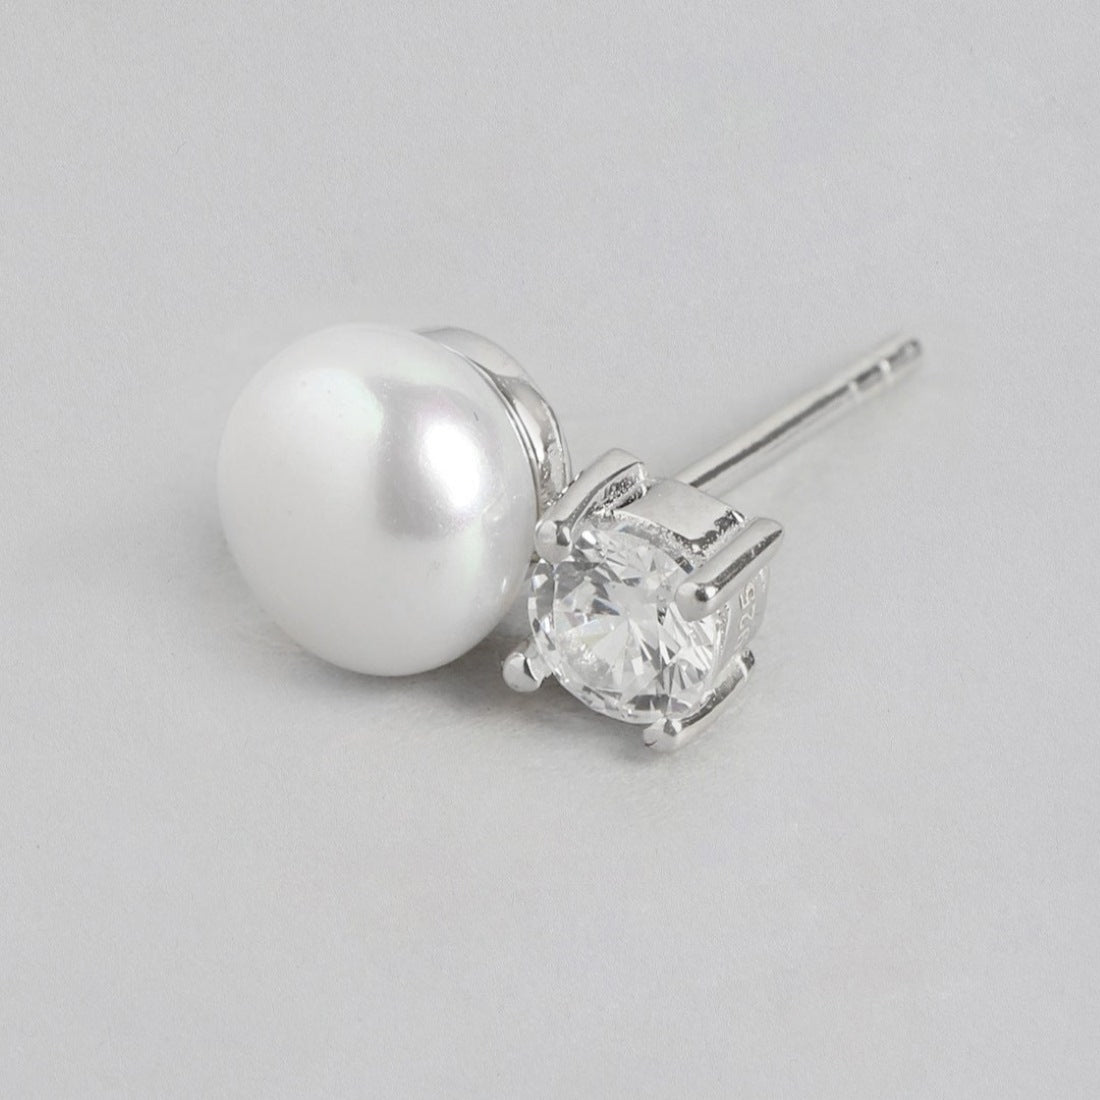 Pearlescent Radiance Rhodium-Plated 925 Sterling Silver Earrings with CZ